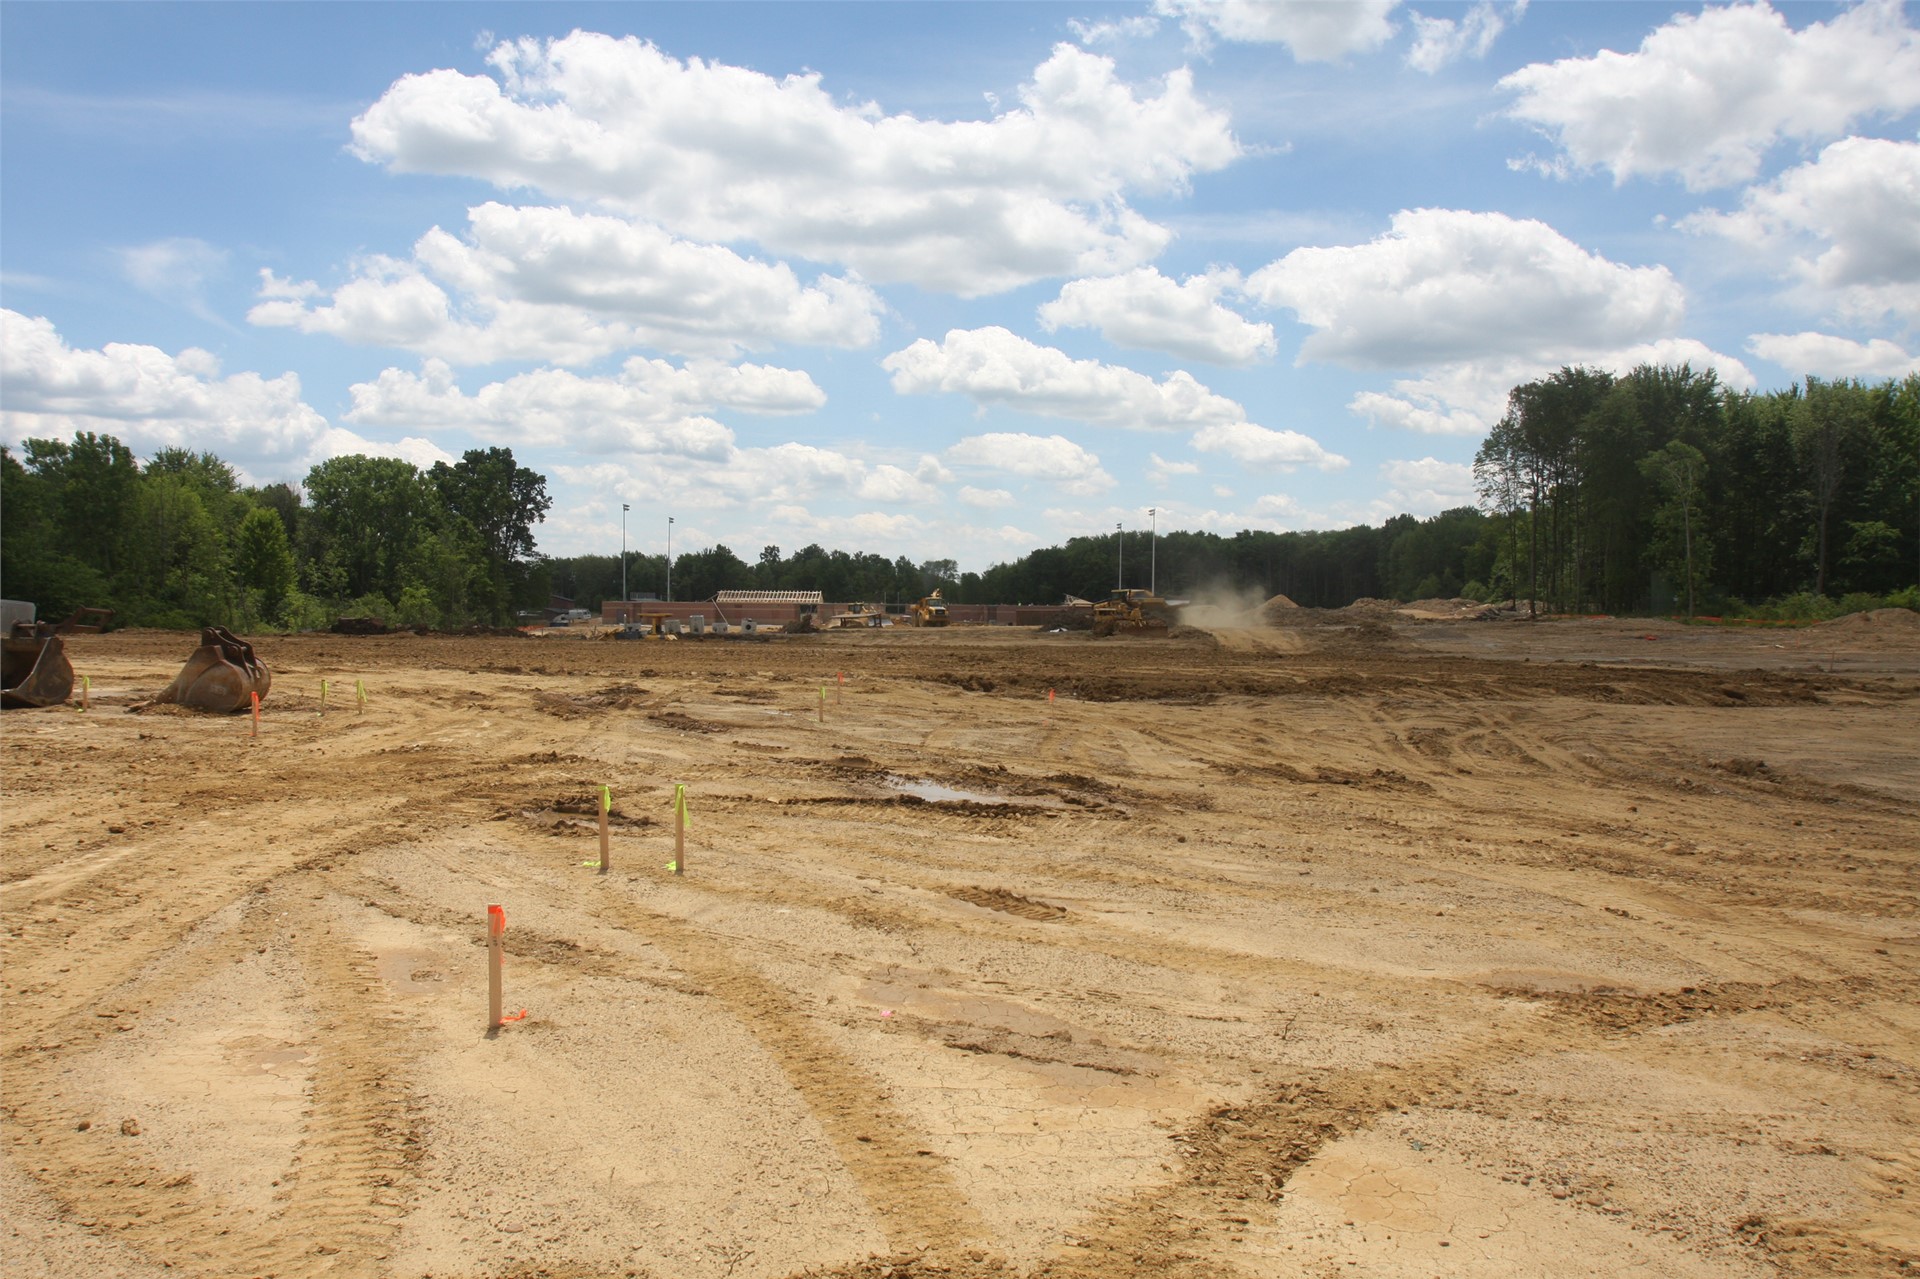 Stadium in distance, parking lot in middle, administrative/guidance offices in foreground